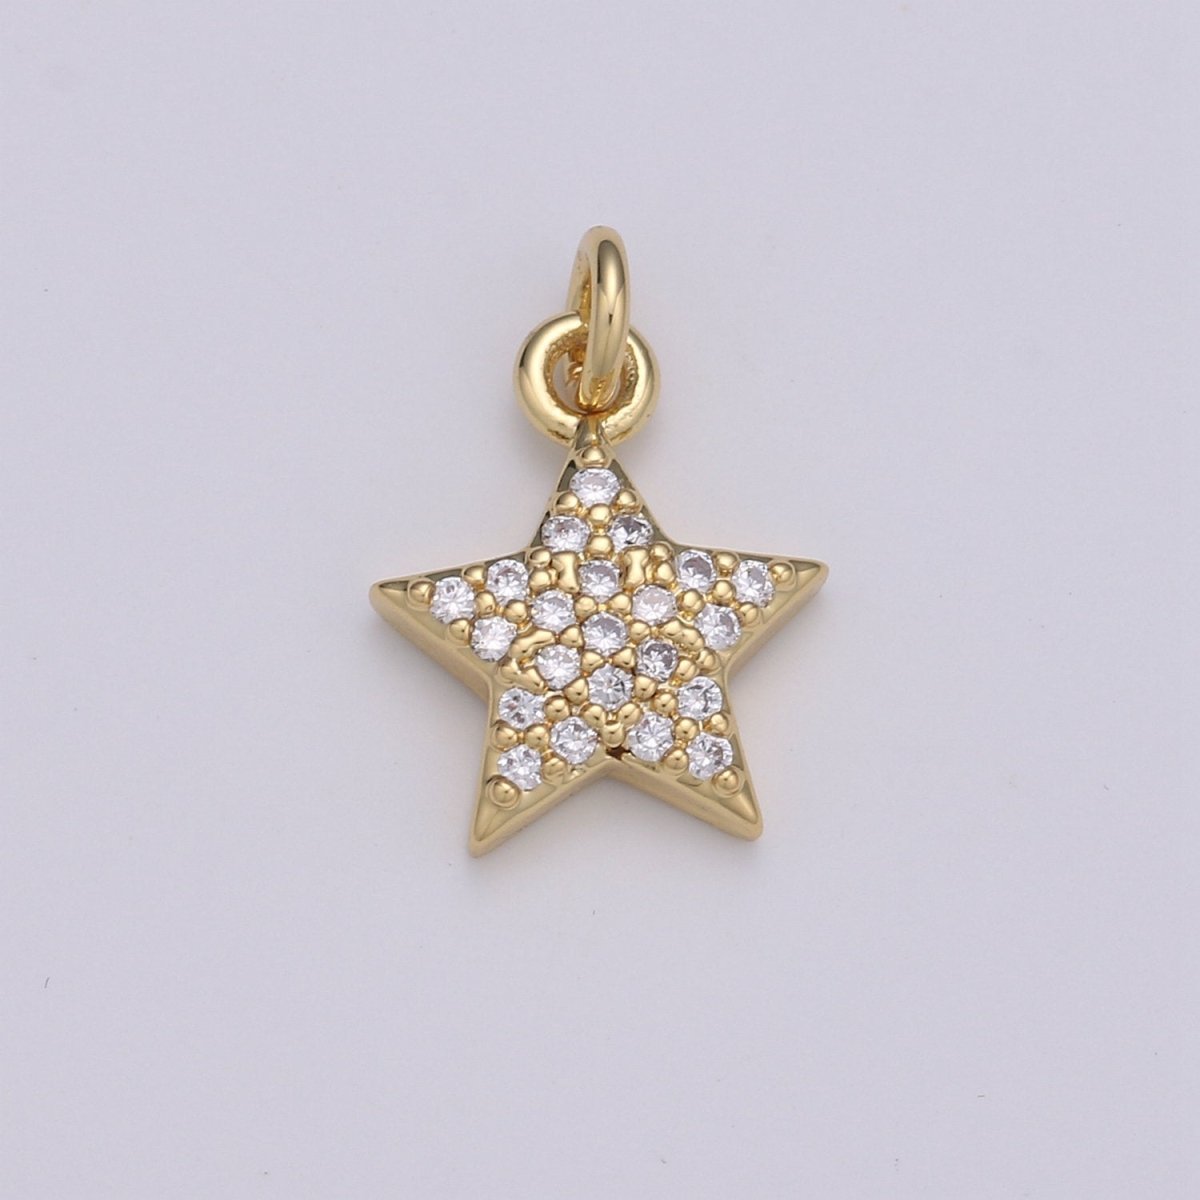 10x10mm 24K Gold Filled Star Charms, Cubic Zirconia Charms, Micro Pave Charms, Star Pendant, CZ Celestial Jewelry Micro Pave Star Charm, D-578 D-579 - DLUXCA